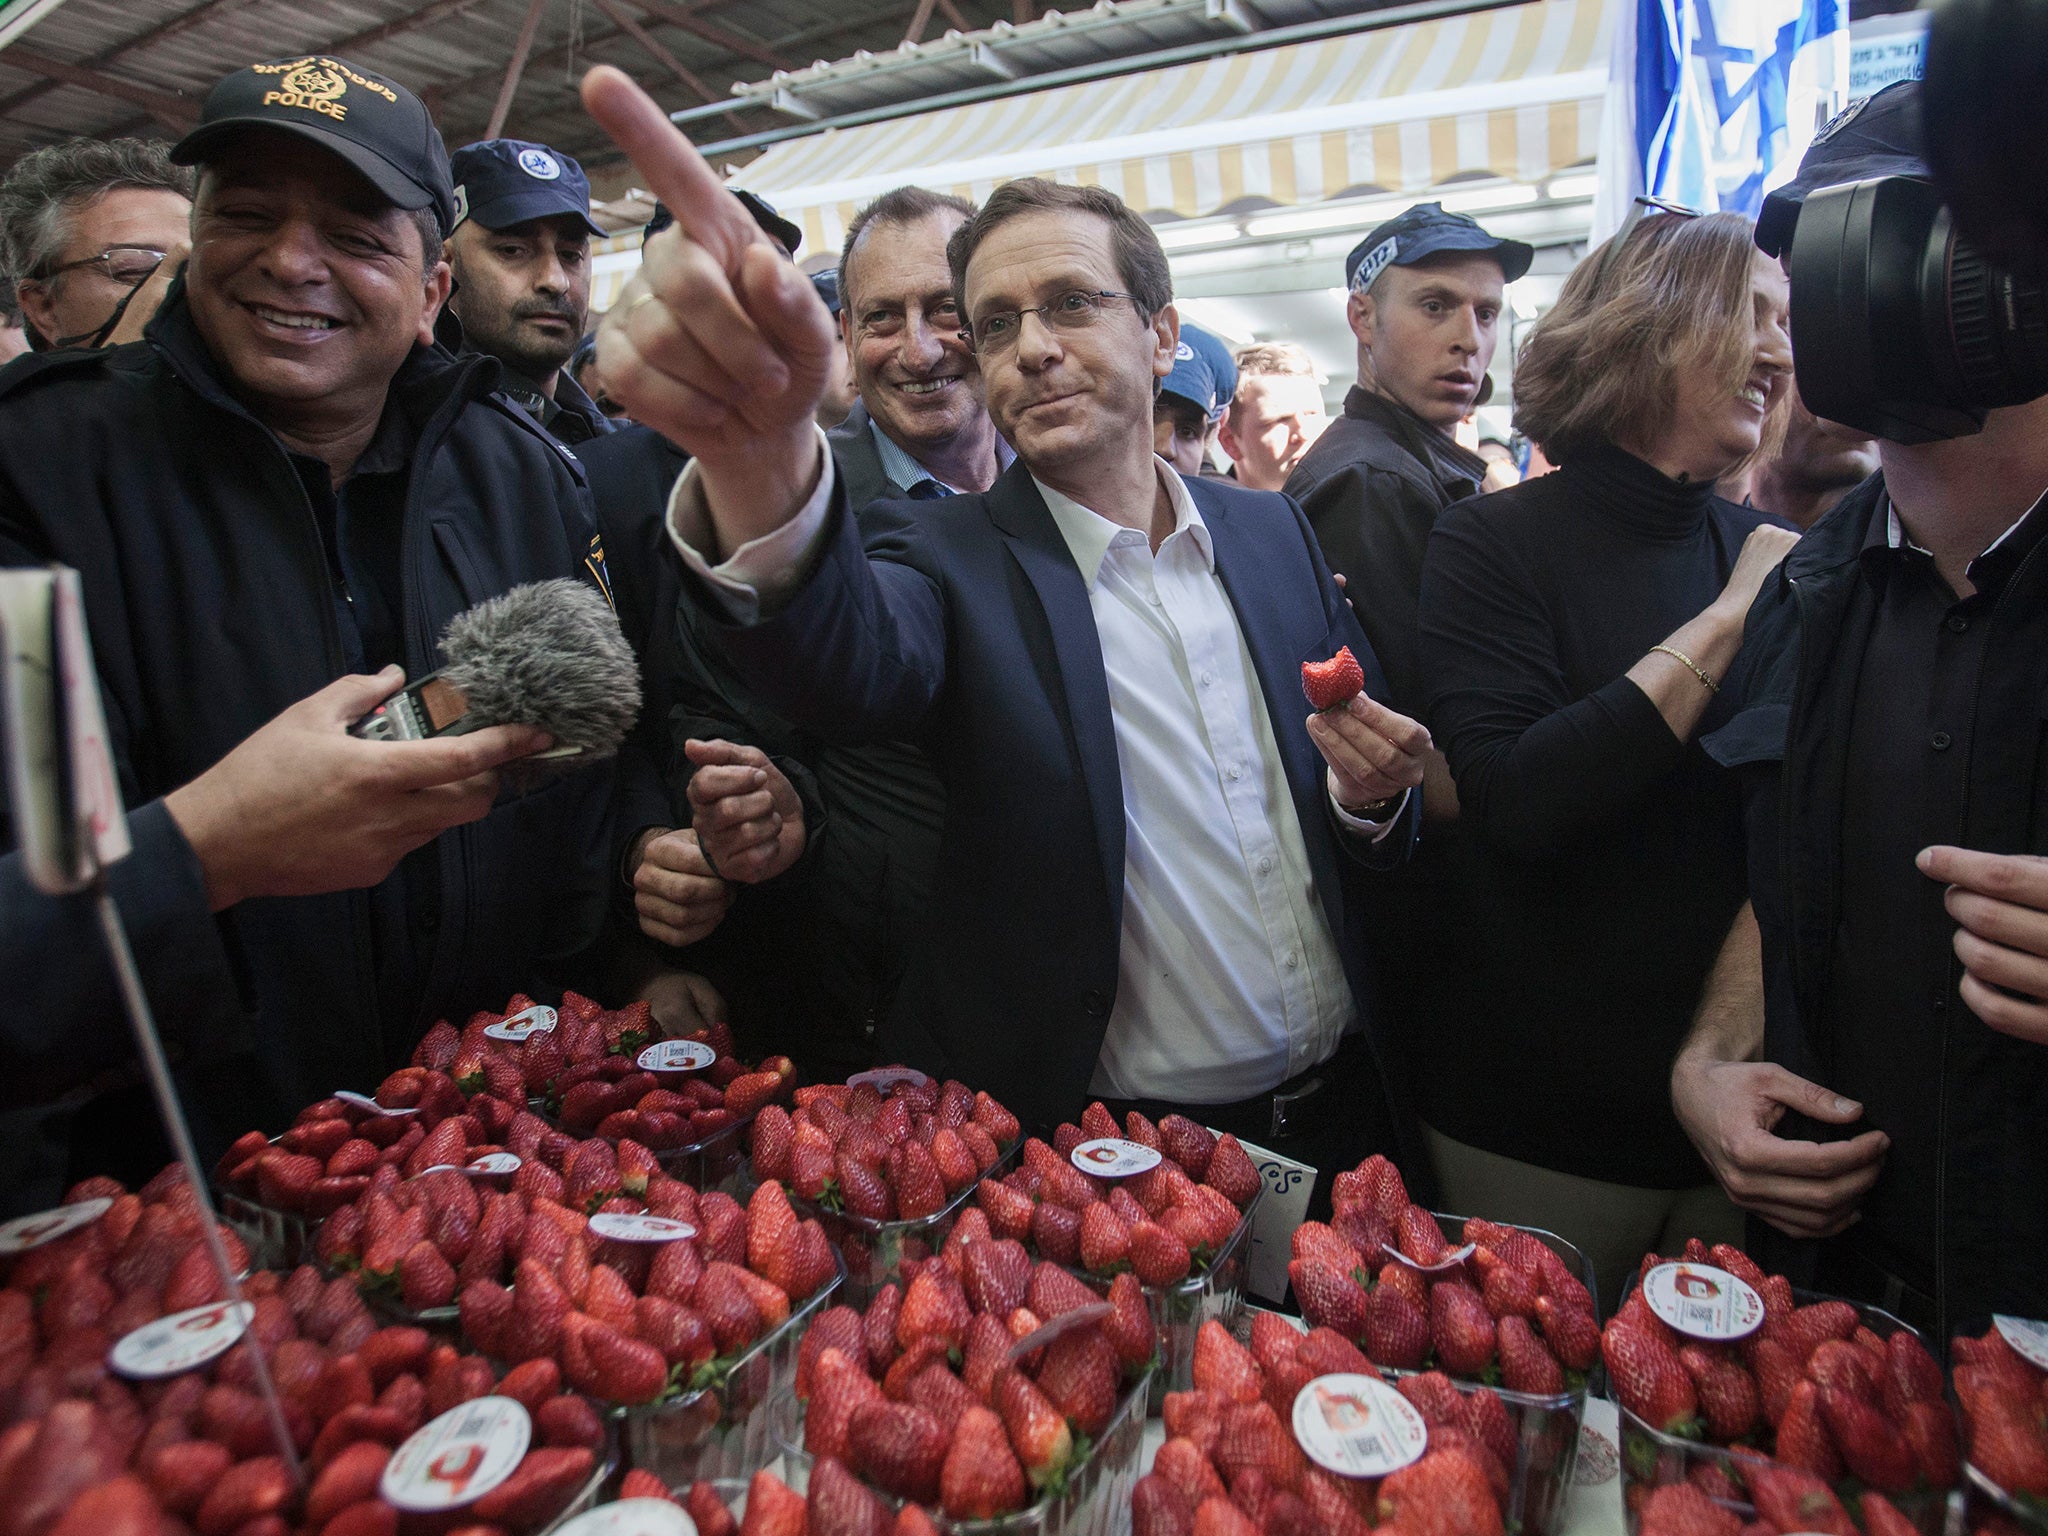 Centre-left politicians, such as Zionist Union’s Isaac Herzog (centre) and Tzipi Livni (right), are focused on reducing food and housing costs